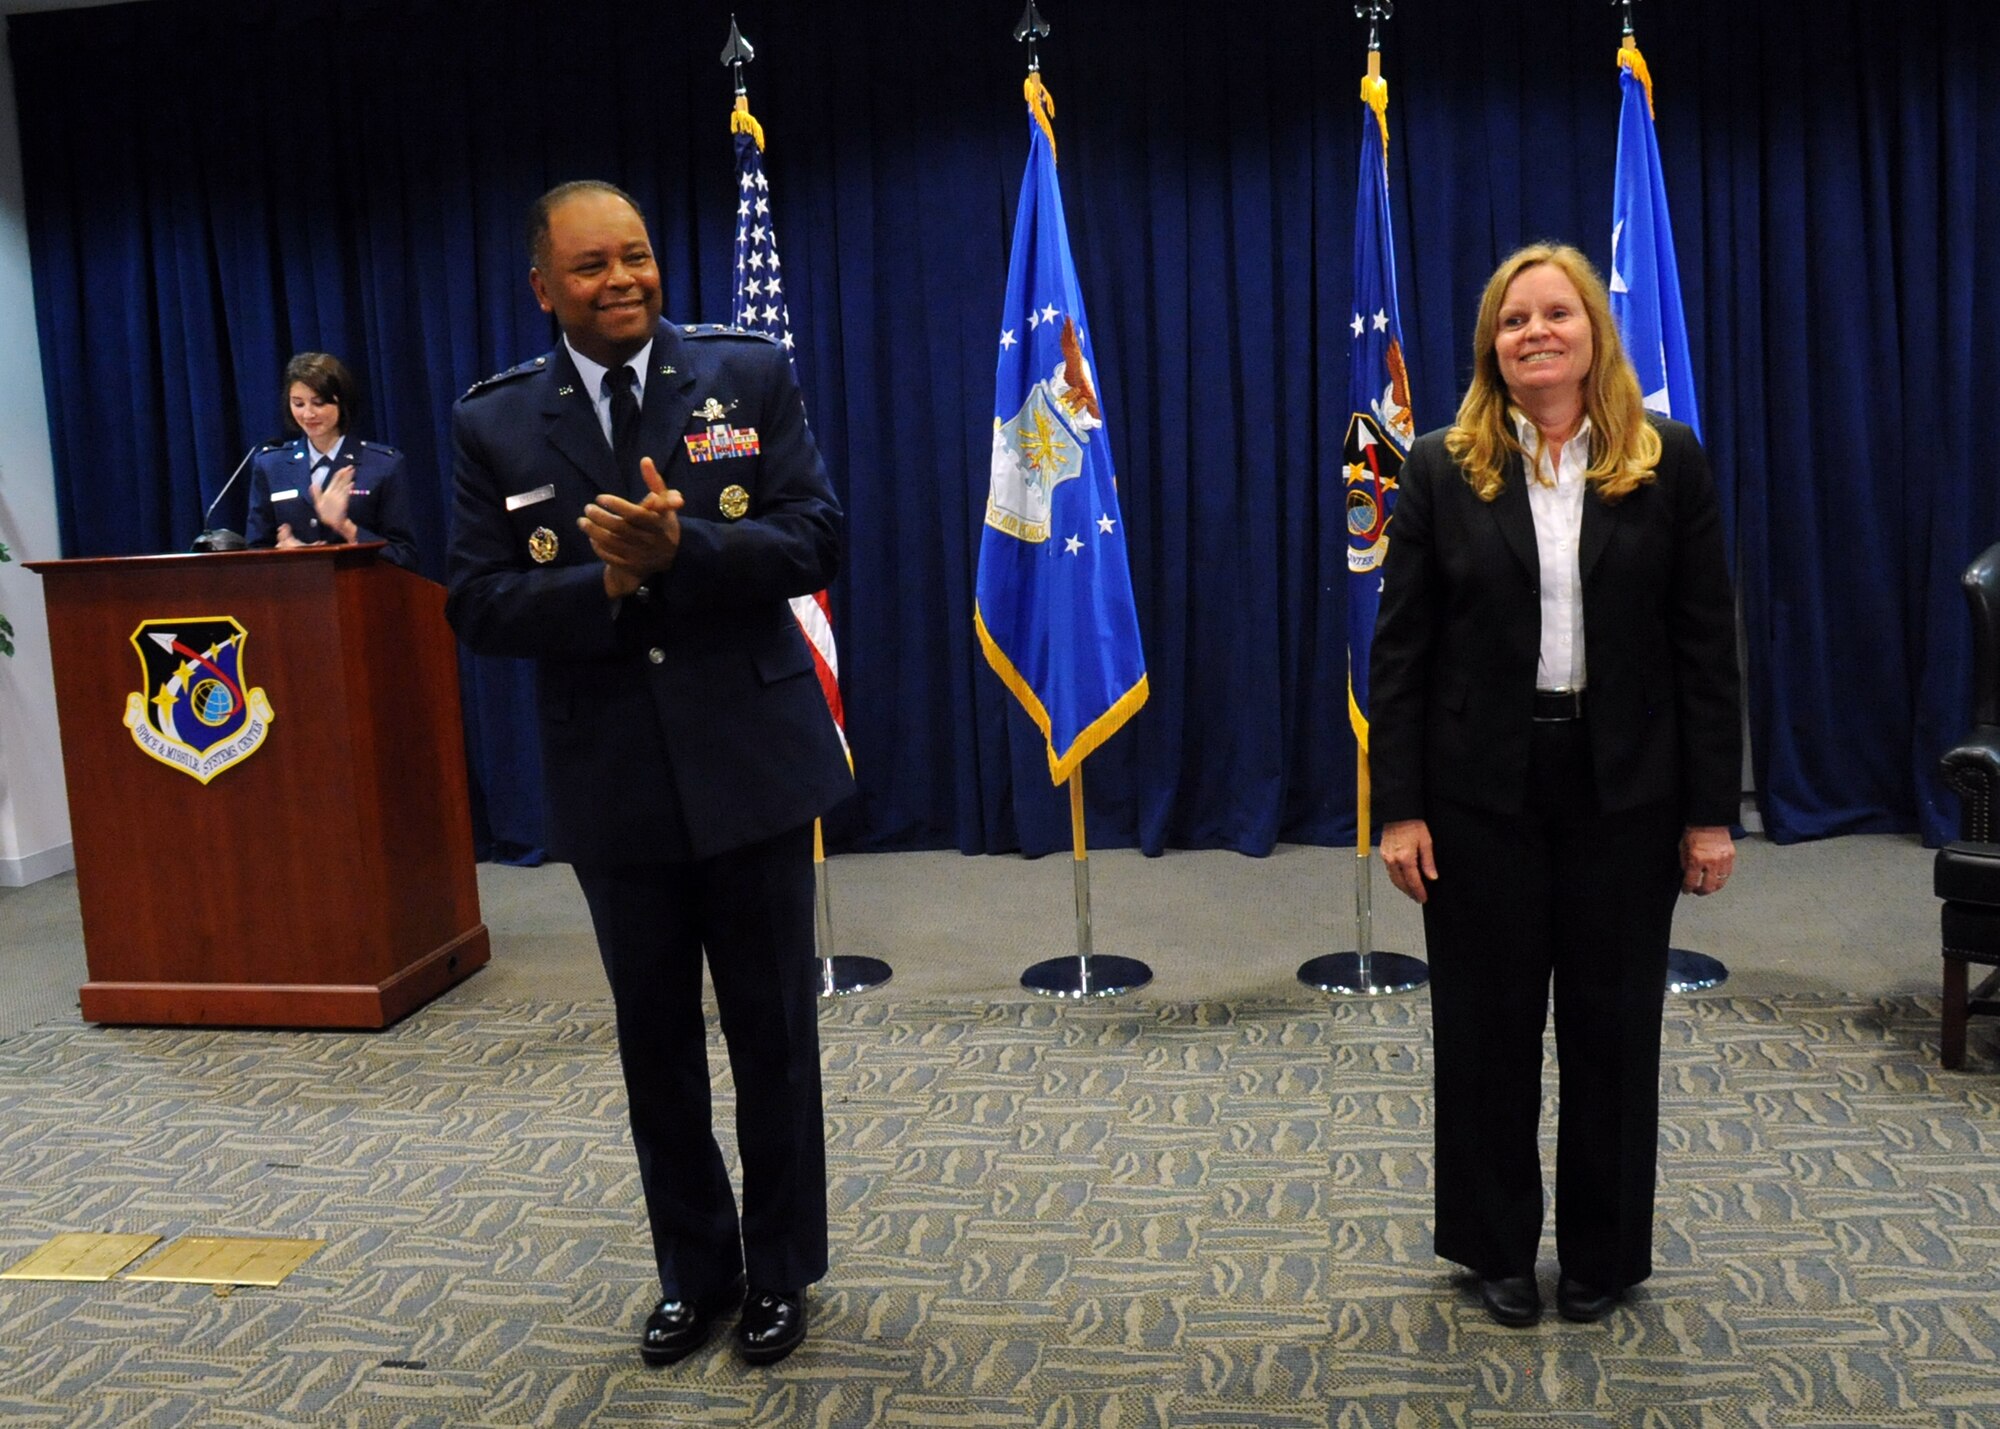 Lt. Gen. Samuel Greaves, Space and Missile Systems Center commander and Air Force program executive officer for Space, leads the audience in applauding Dr. Claire Leon as the first director of the Launch Systems Enterprise Directorate during a stand-up ceremony Oct. 14, 2015, at Los Angeles Air Force Base, Calif. (U.S. Air Force photo/Van De Ha)